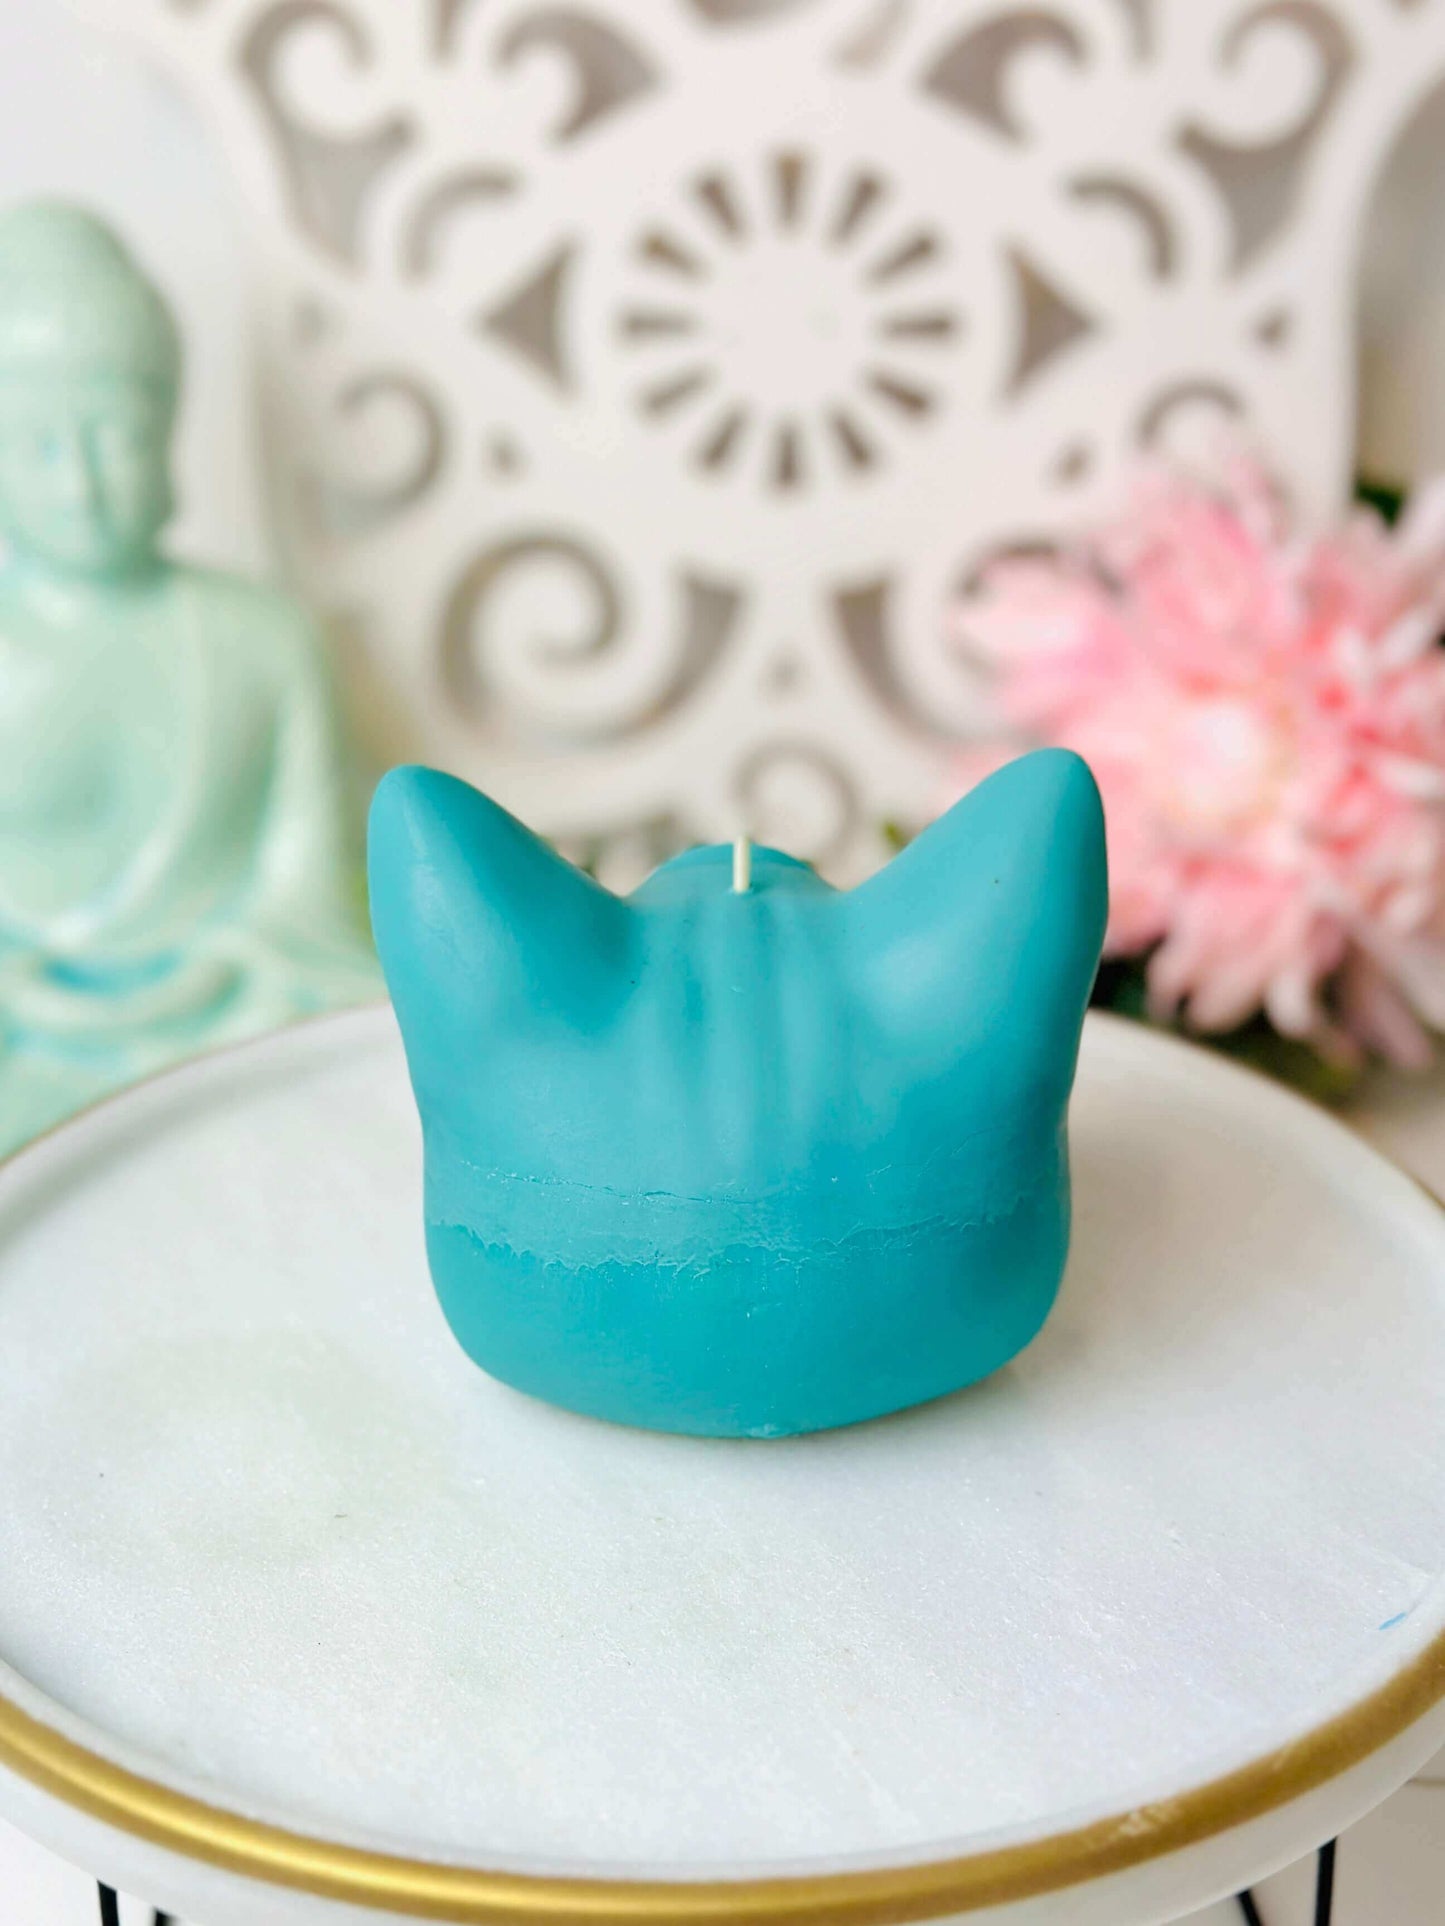 XL Third eye cat candle mold, Silicone moulds